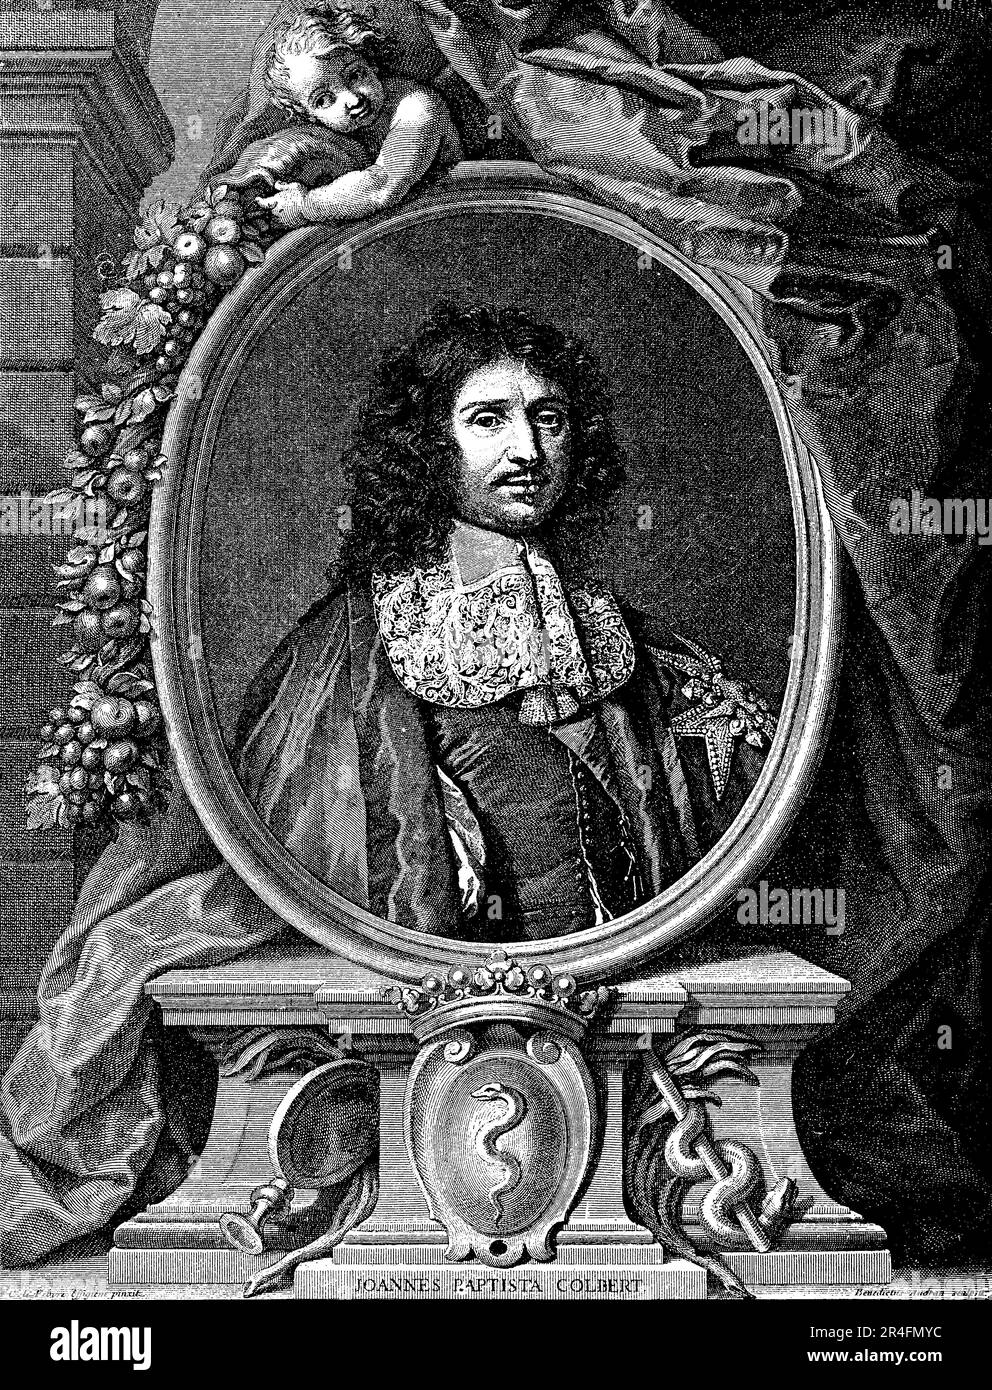 Jean-Baptiste Colbert was a 17th-century French statesman who served as the Minister of Finance under King Louis XIV. He played a key role in promoting the economic development of France, including the expansion of manufacturing, agriculture, and overseas trade. He implemented policies that encouraged the growth of industry and commerce, and sought to centralize and rationalize the French economy. He also played a role in the expansion of French territories overseas, including the establishment of colonies in North America and the Caribbean. He is considered one of the most important figures i Stock Photo